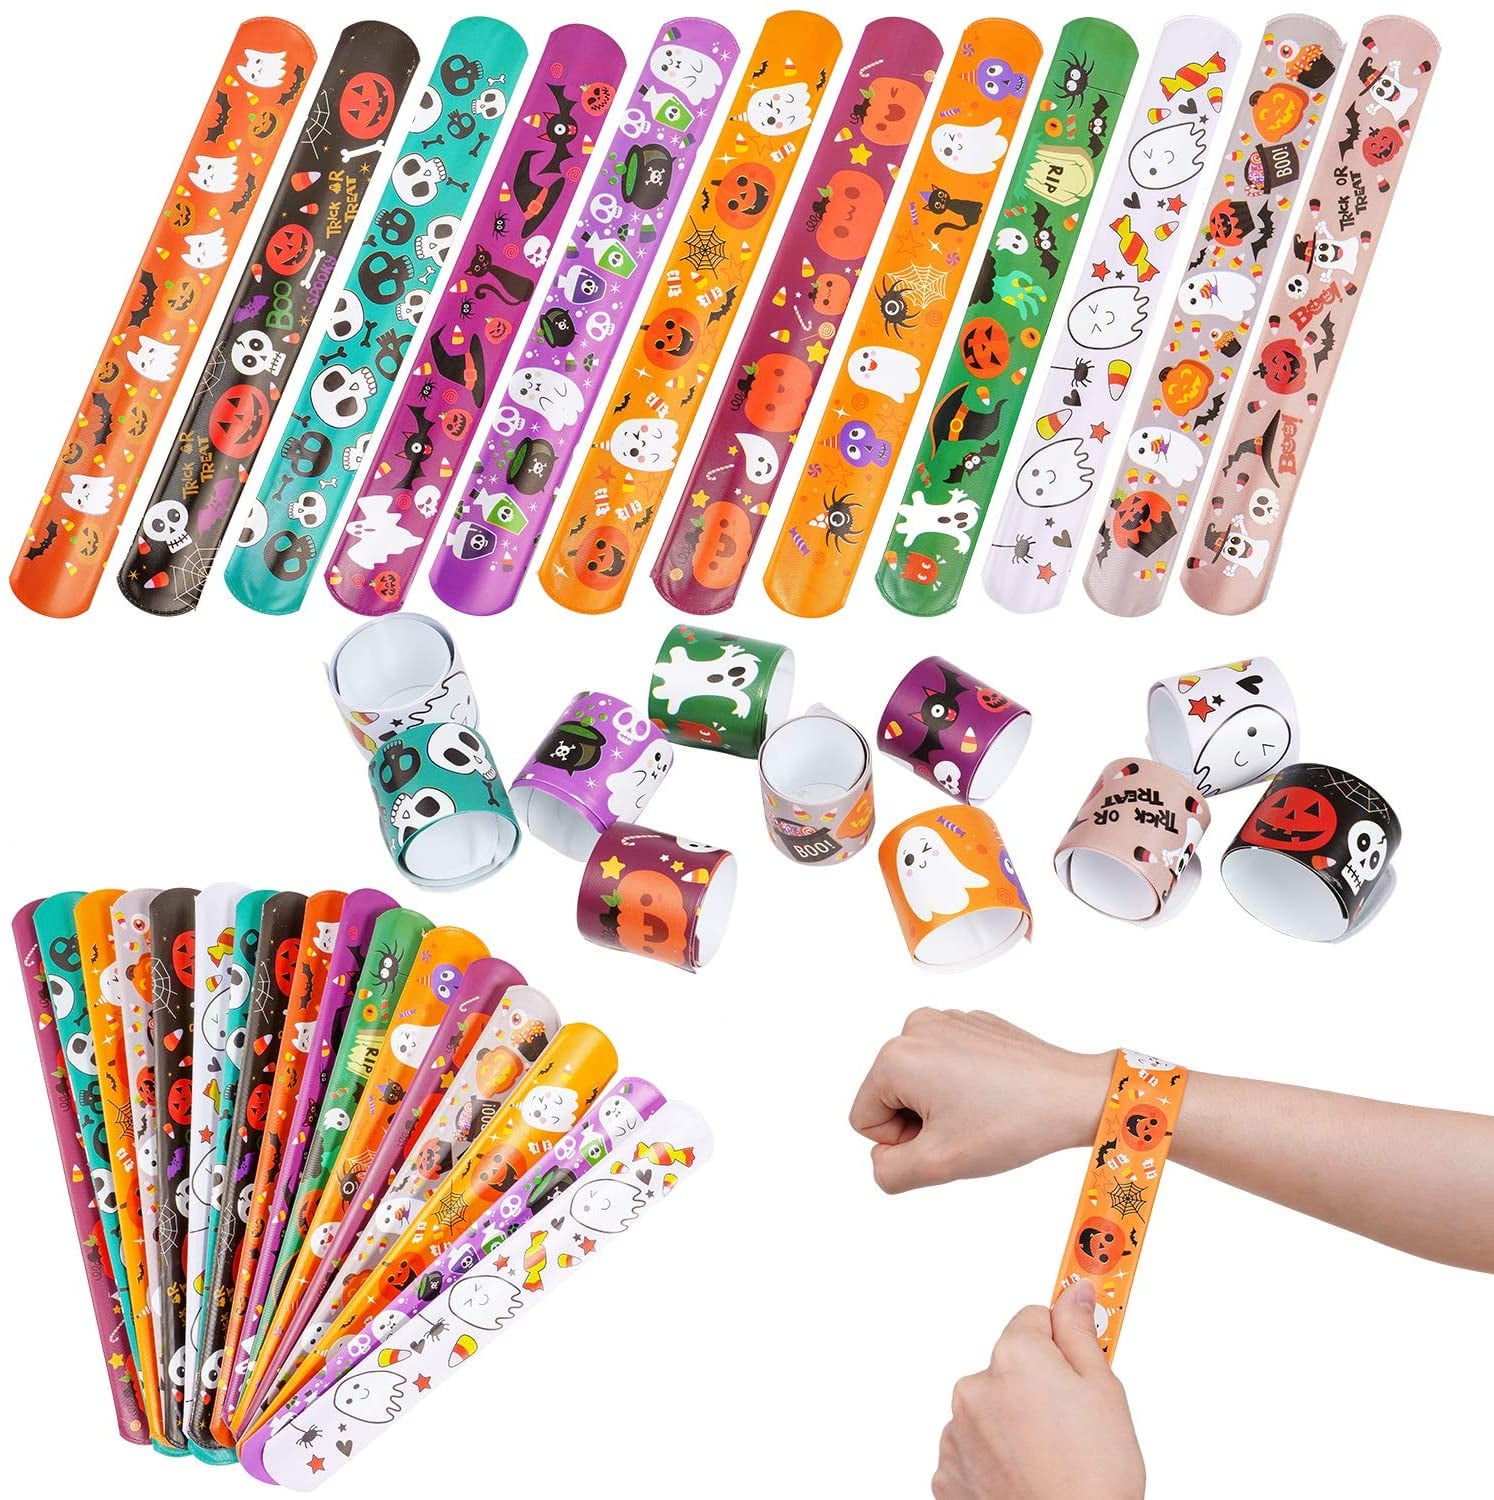 100 Pcs Friendship Bracelets Halloween Party Supplies and Decorations Snap Bracelets with Halloween Classies Pattern JOYIN Halloween Slap Bracelets Party Favors for Kids 